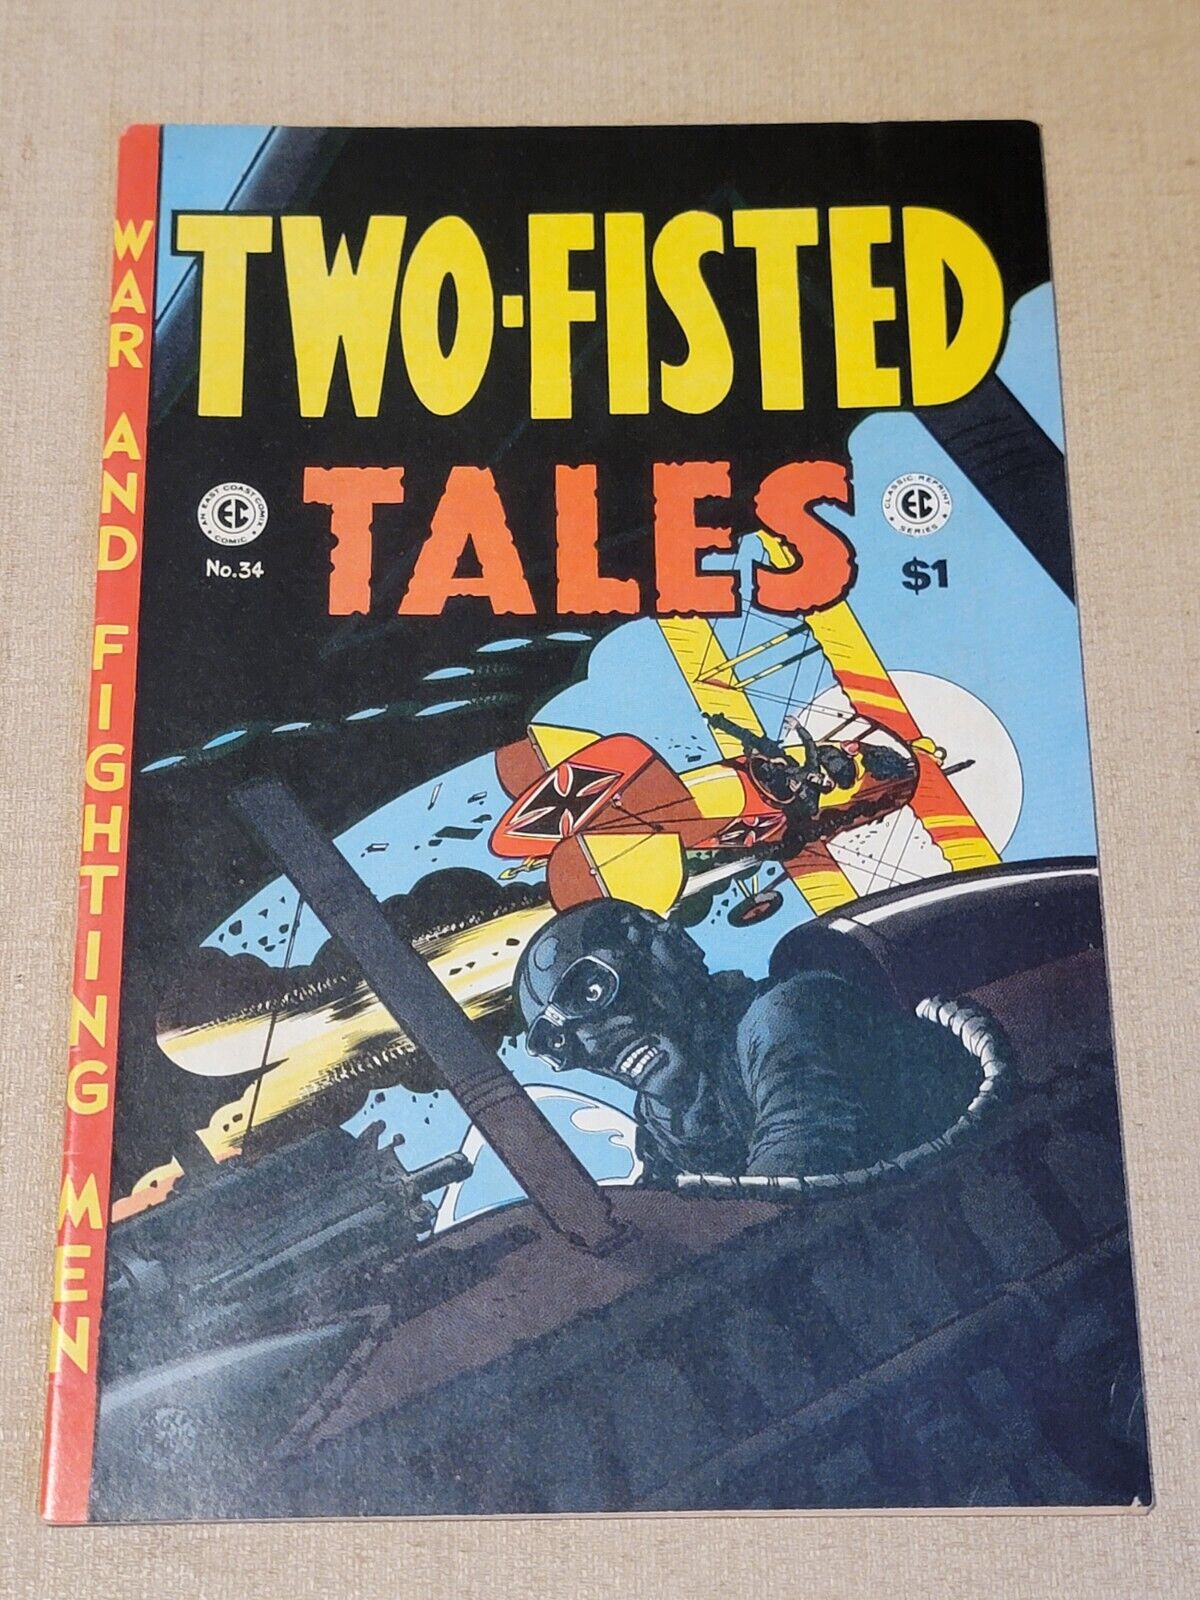 Two-Fisted Tales #34 1974 EAST COAST COMIX EC Comic Book Bronze Age 